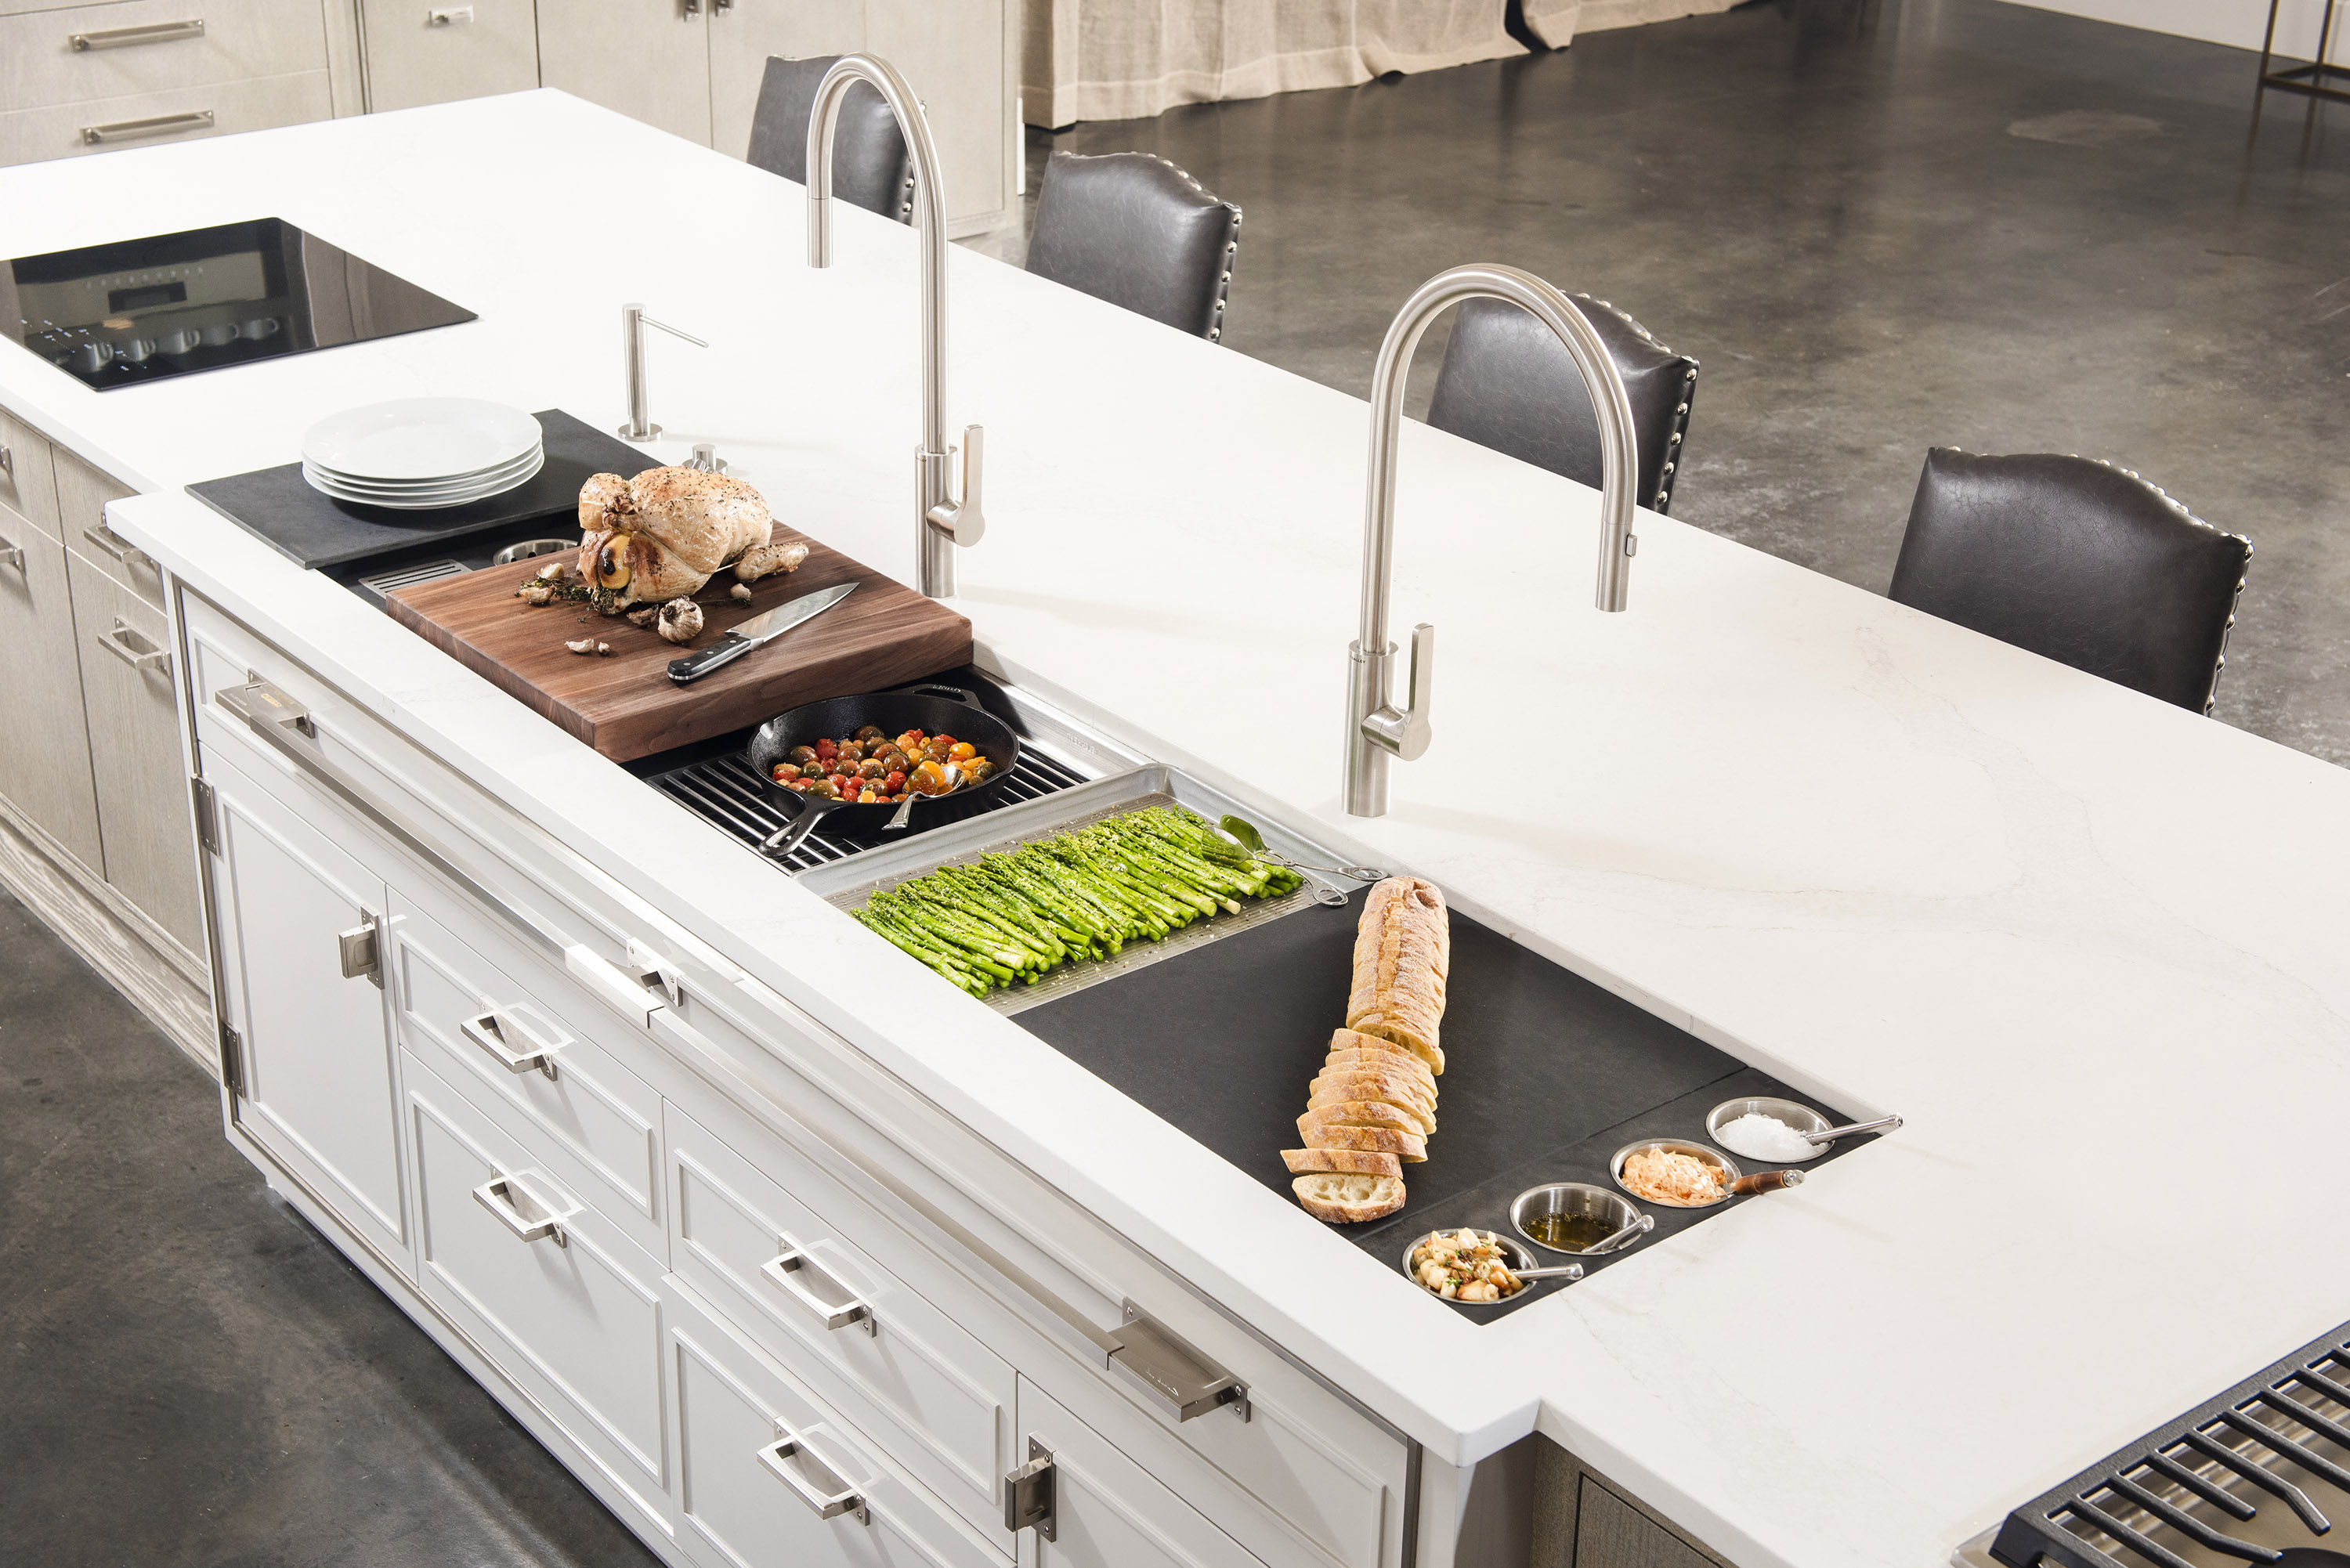 Transform a kitchen island with The Galley Workstation designed for your lifestyle of food prep, cooking, serving, entertaining and cleaning.